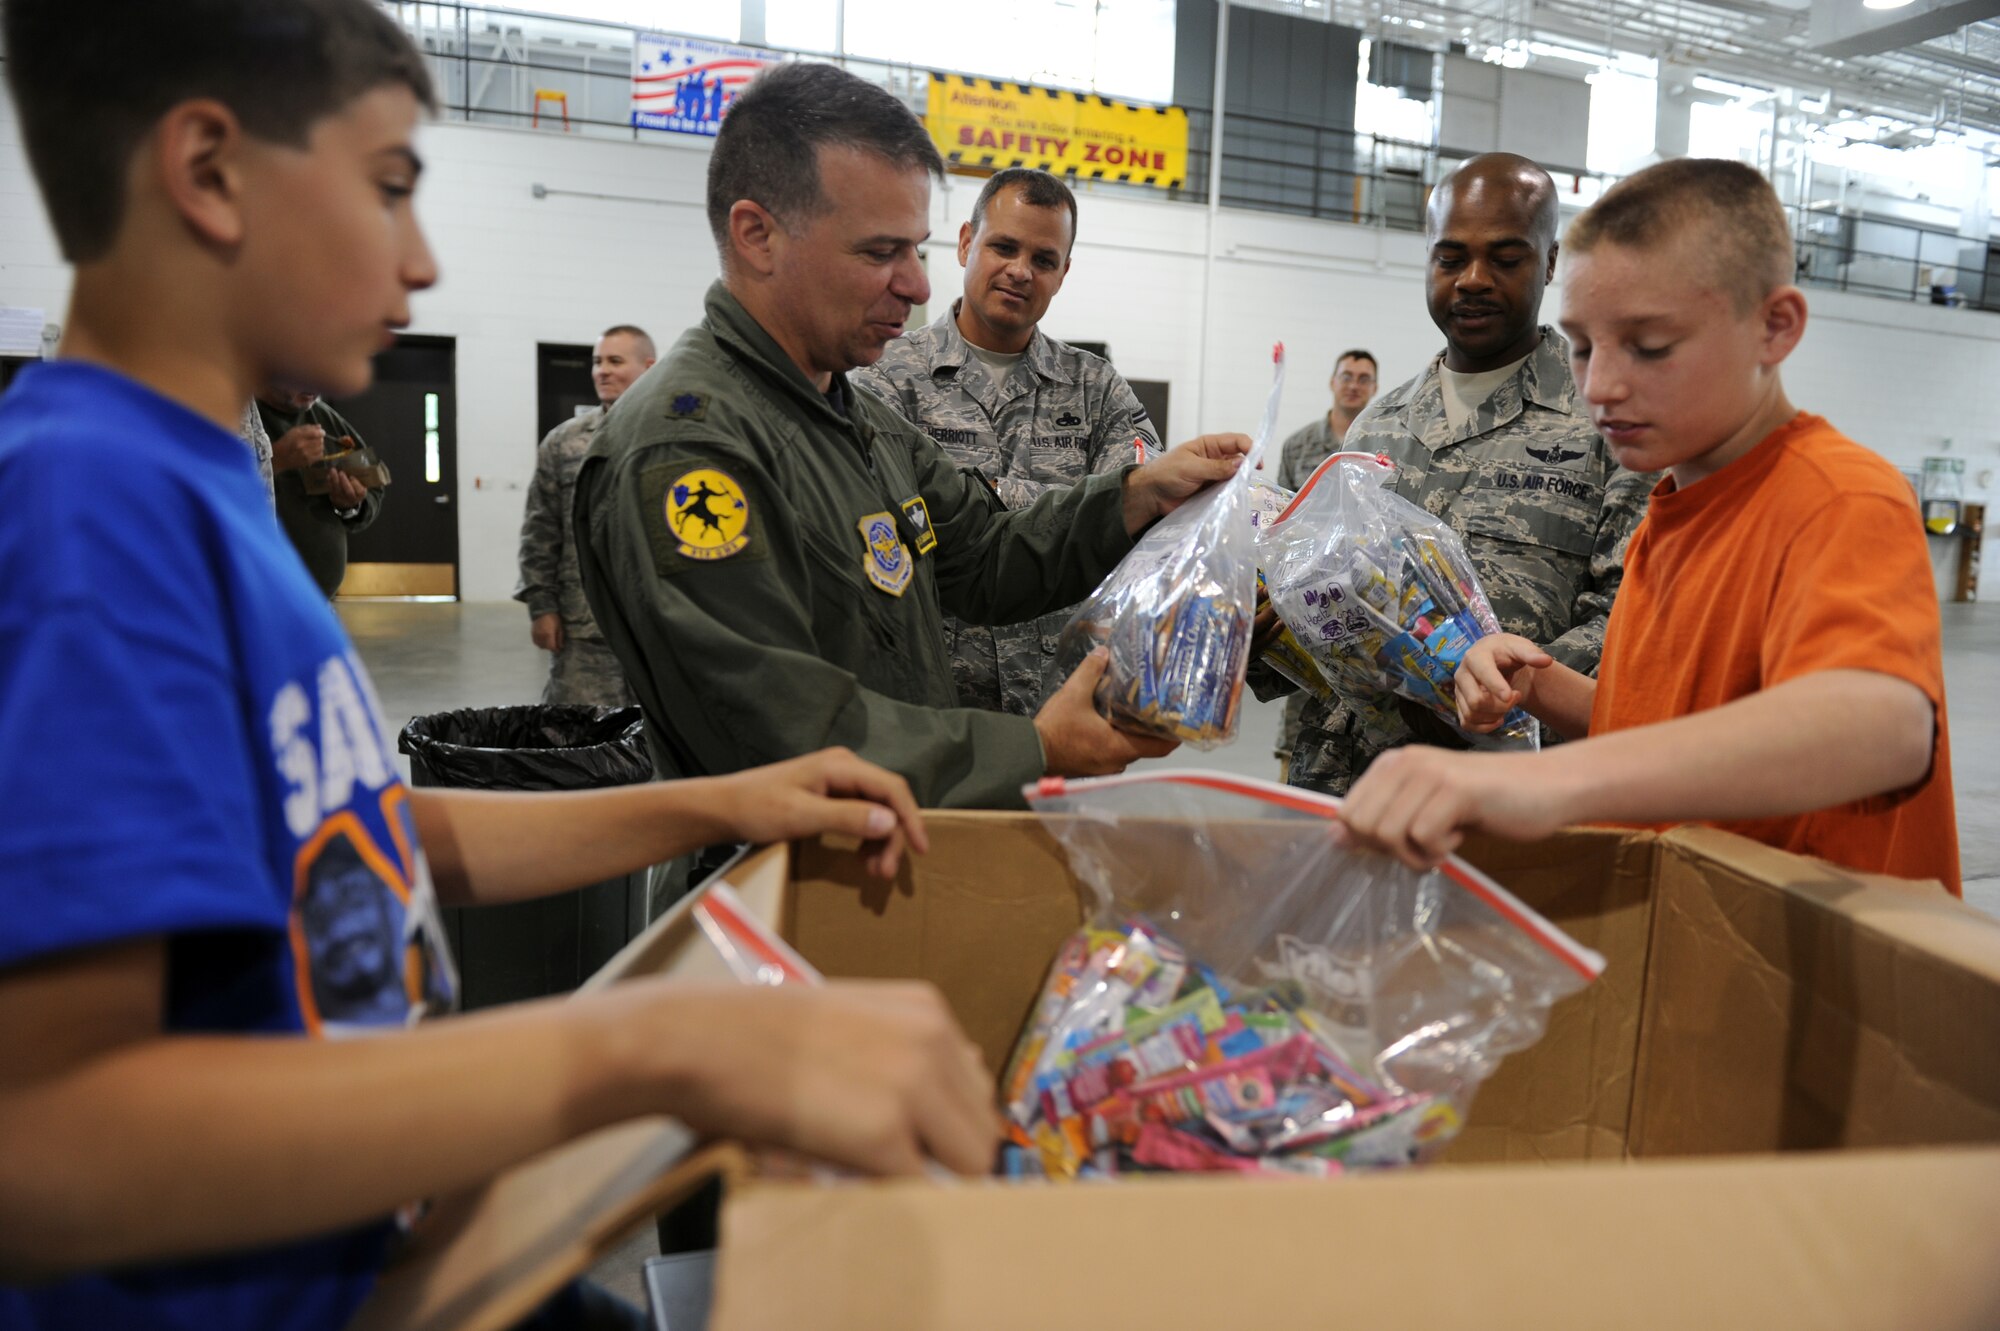 JOINT BASE MCGUIRE-DIX-LAKEHURST, N.J. -- Sixth-grade students from Jonas Salk Middle School present members of the 818th Global Mobility Squadron with drink mix packets and other non-perishable items during a tour here June 9.  The 621st Contingency Response Wing's 818th Global Mobility Squadron invited 16 special education students from Jonas Salk Middle School in Old Bridge, N.J. to visit the base for a tour of aircraft, facilities and equipment. (U.S. Air Force photo by Tech. Sgt. Laura K. Deckman)(released)